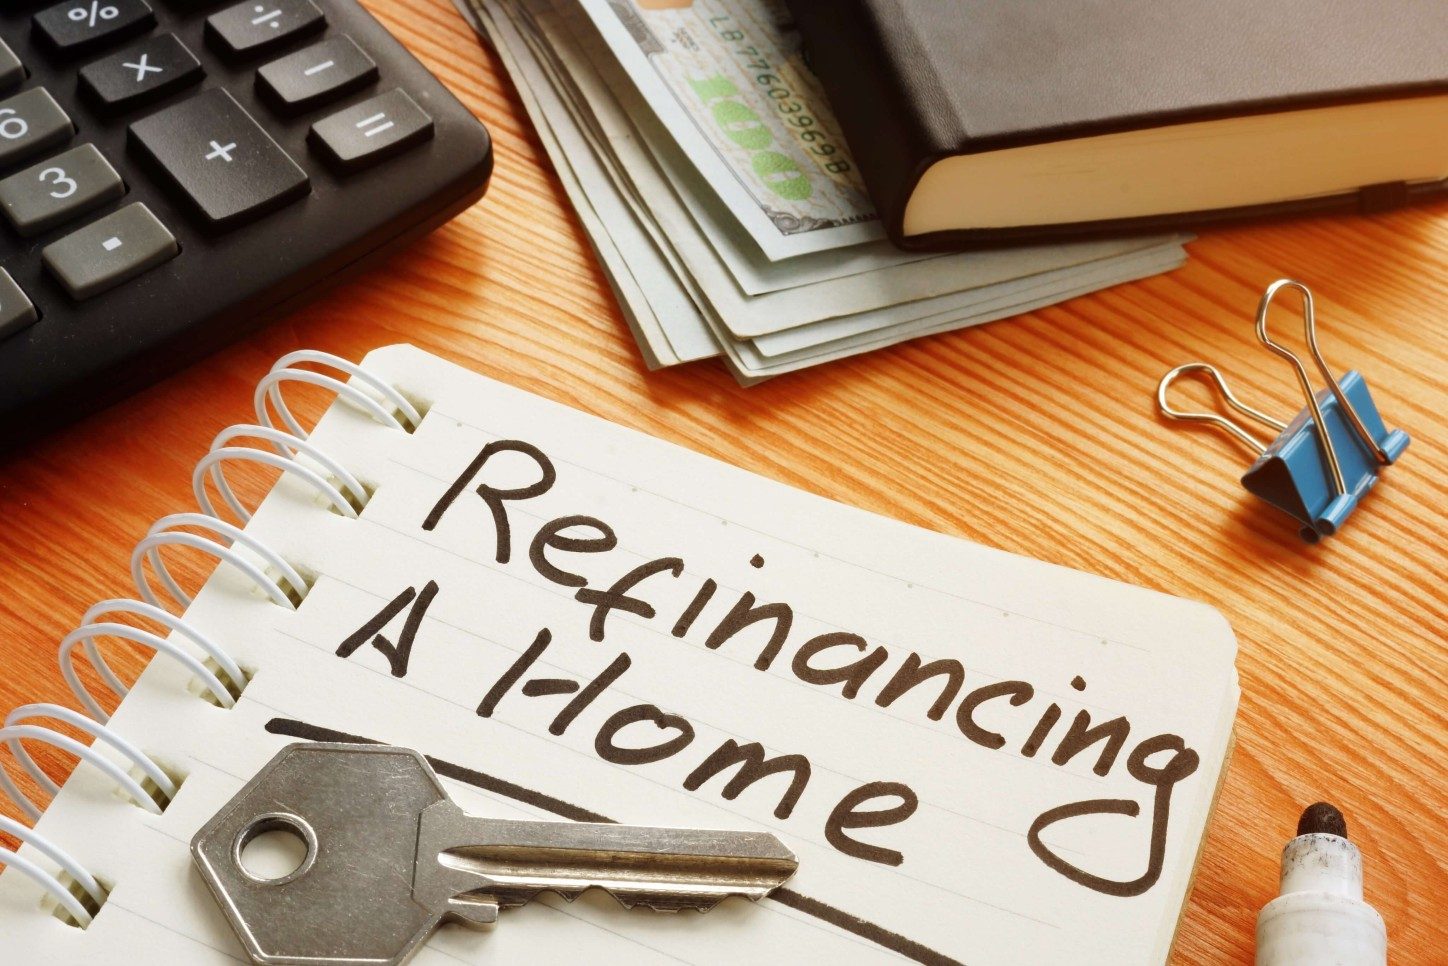 What Do You Need to Know Before Mortgage Refinancing?